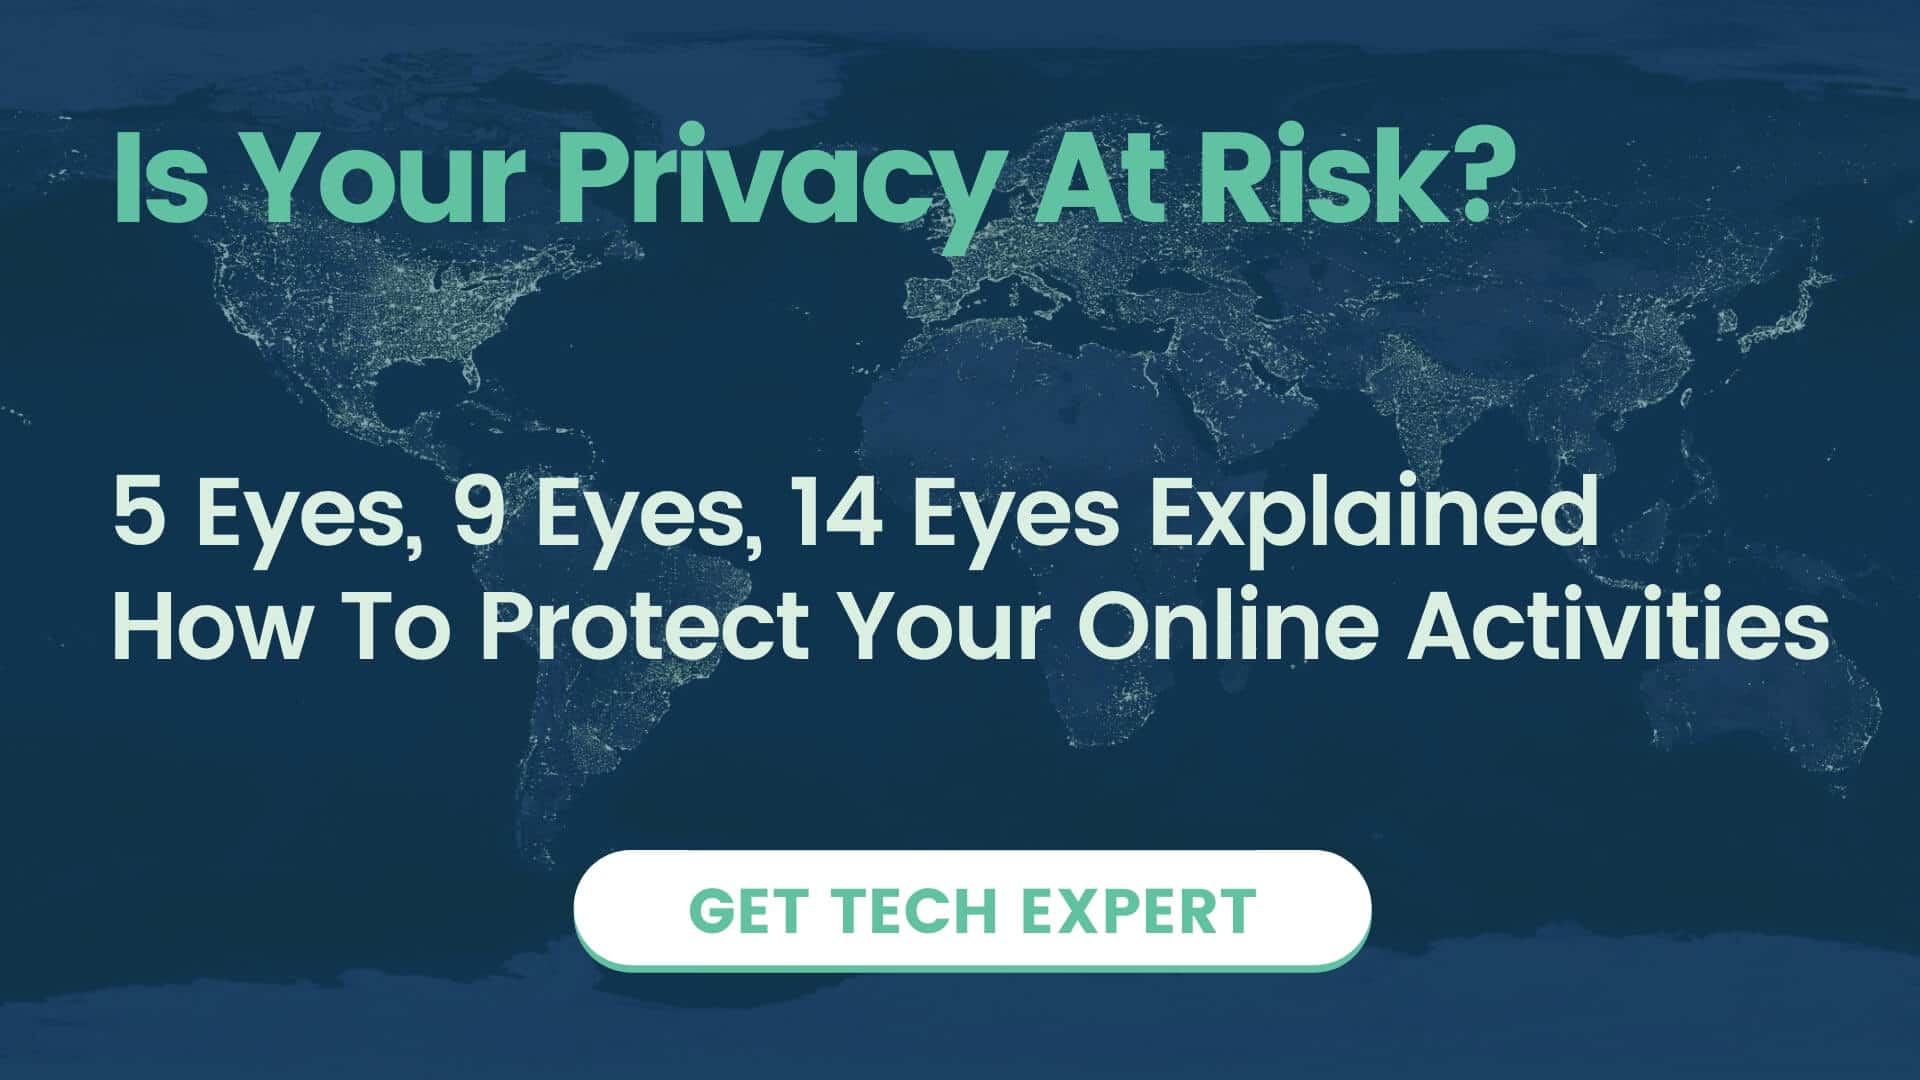 Five Eyes Alliance, What You Should Know